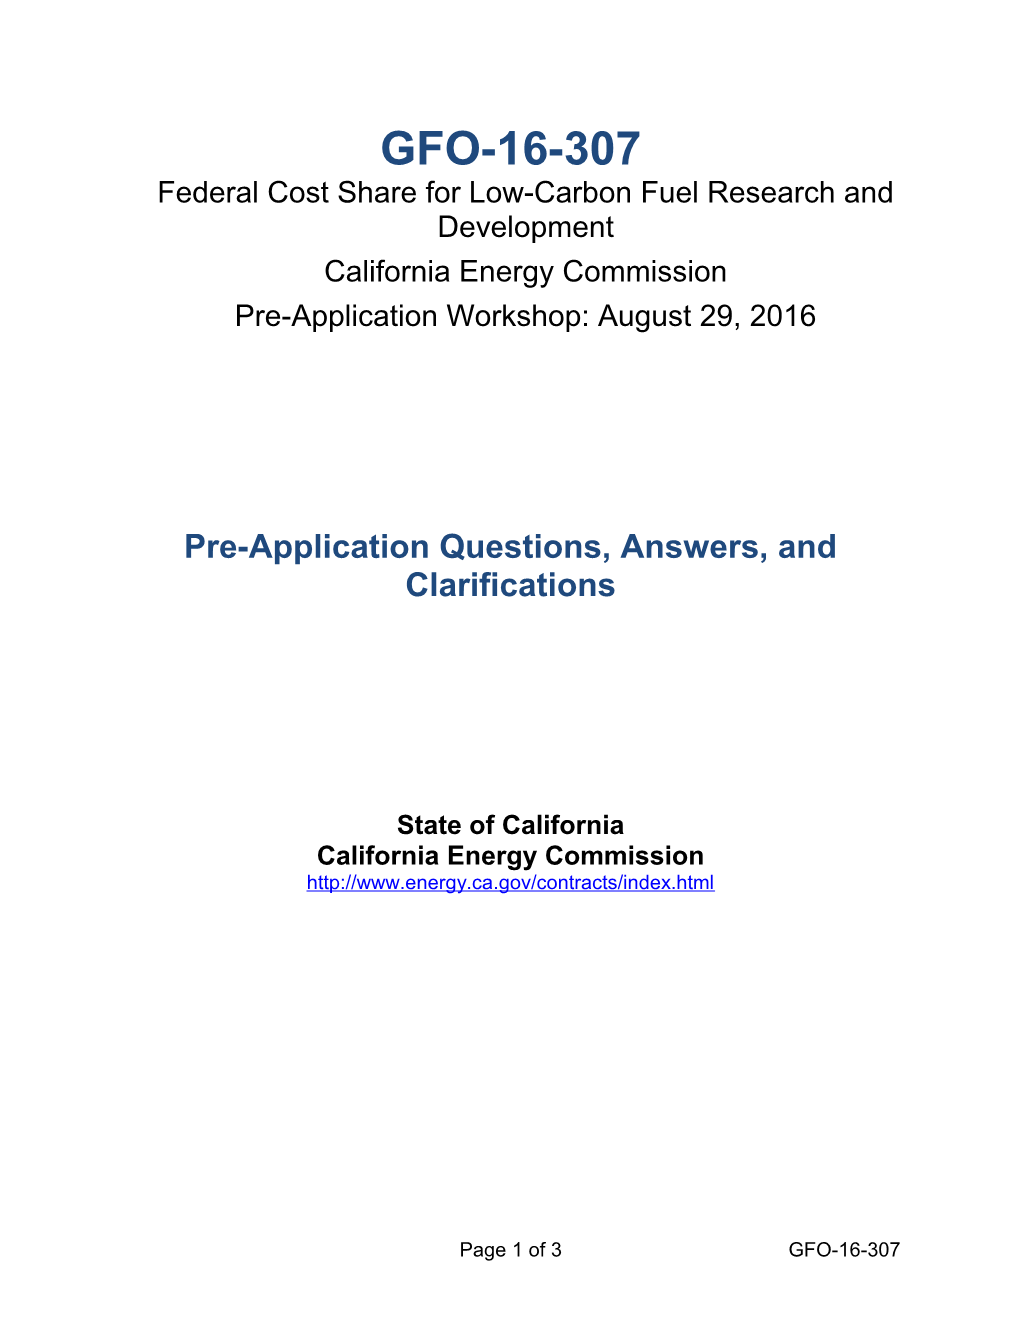 Federal Cost Share for Low-Carbon Fuel Research and Development